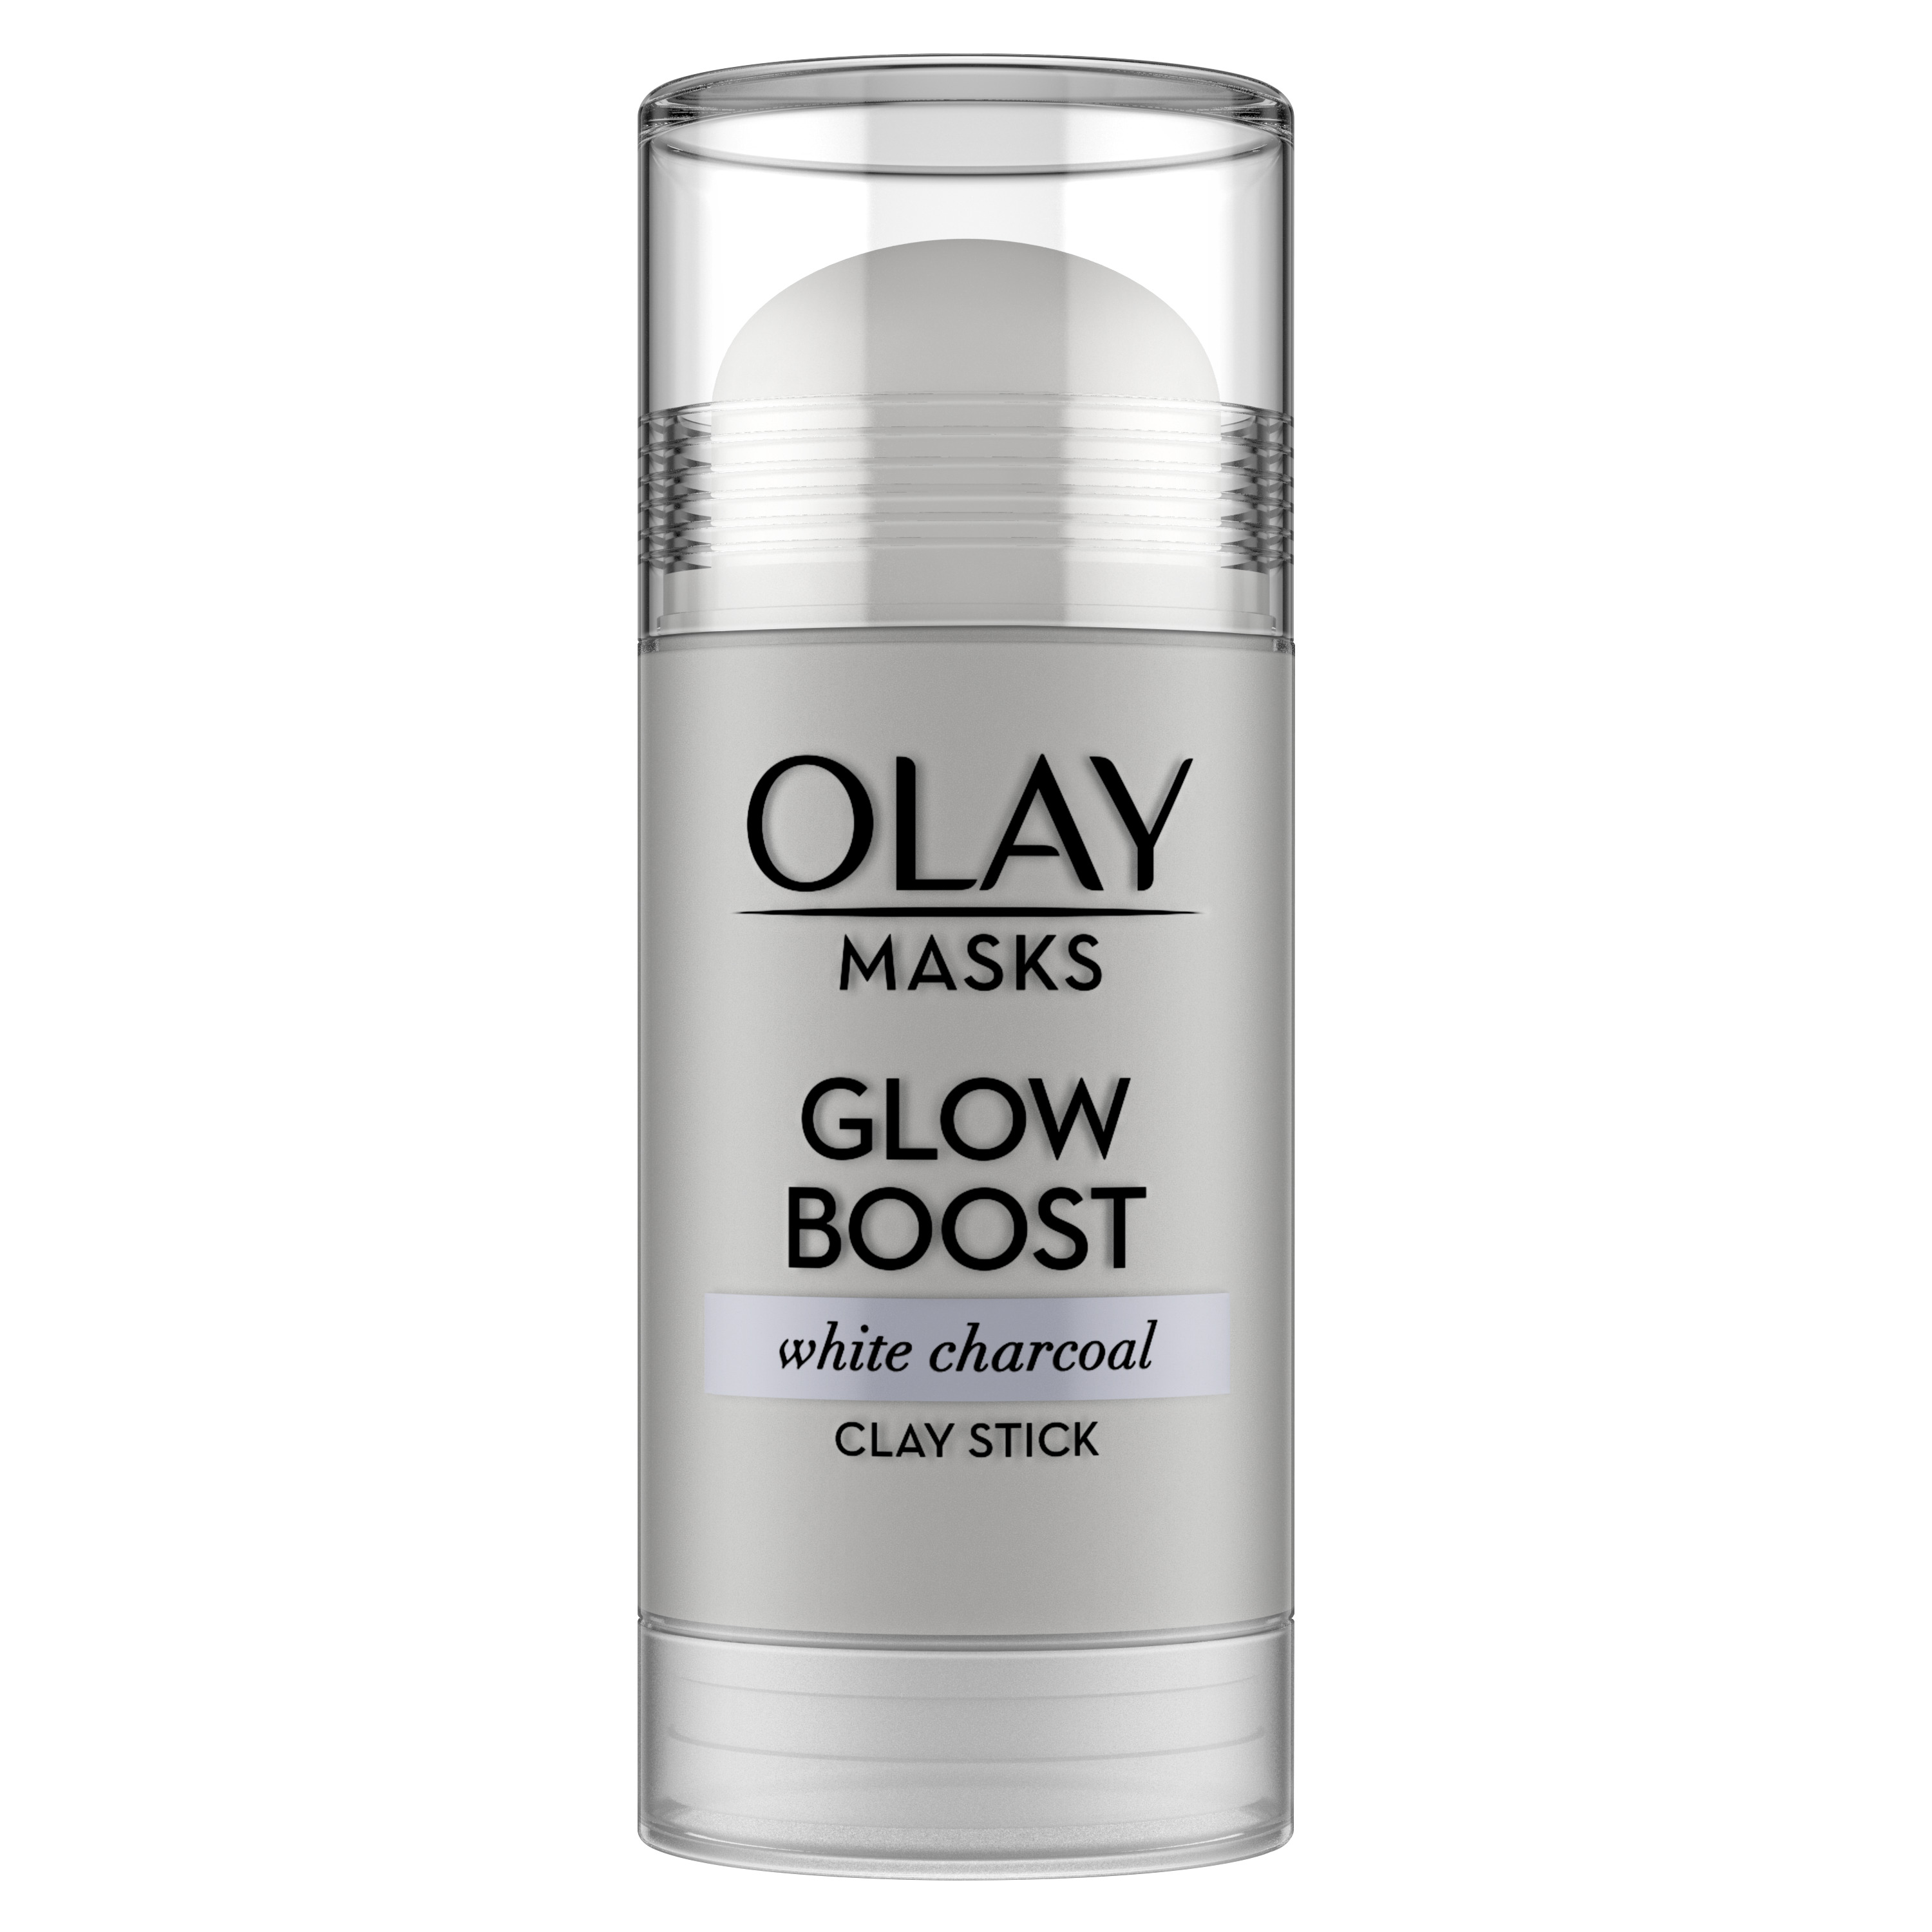 Olay Face Mask Stick, Glow Boost with White Charcoal Clay, 1.7 oz - image 1 of 9